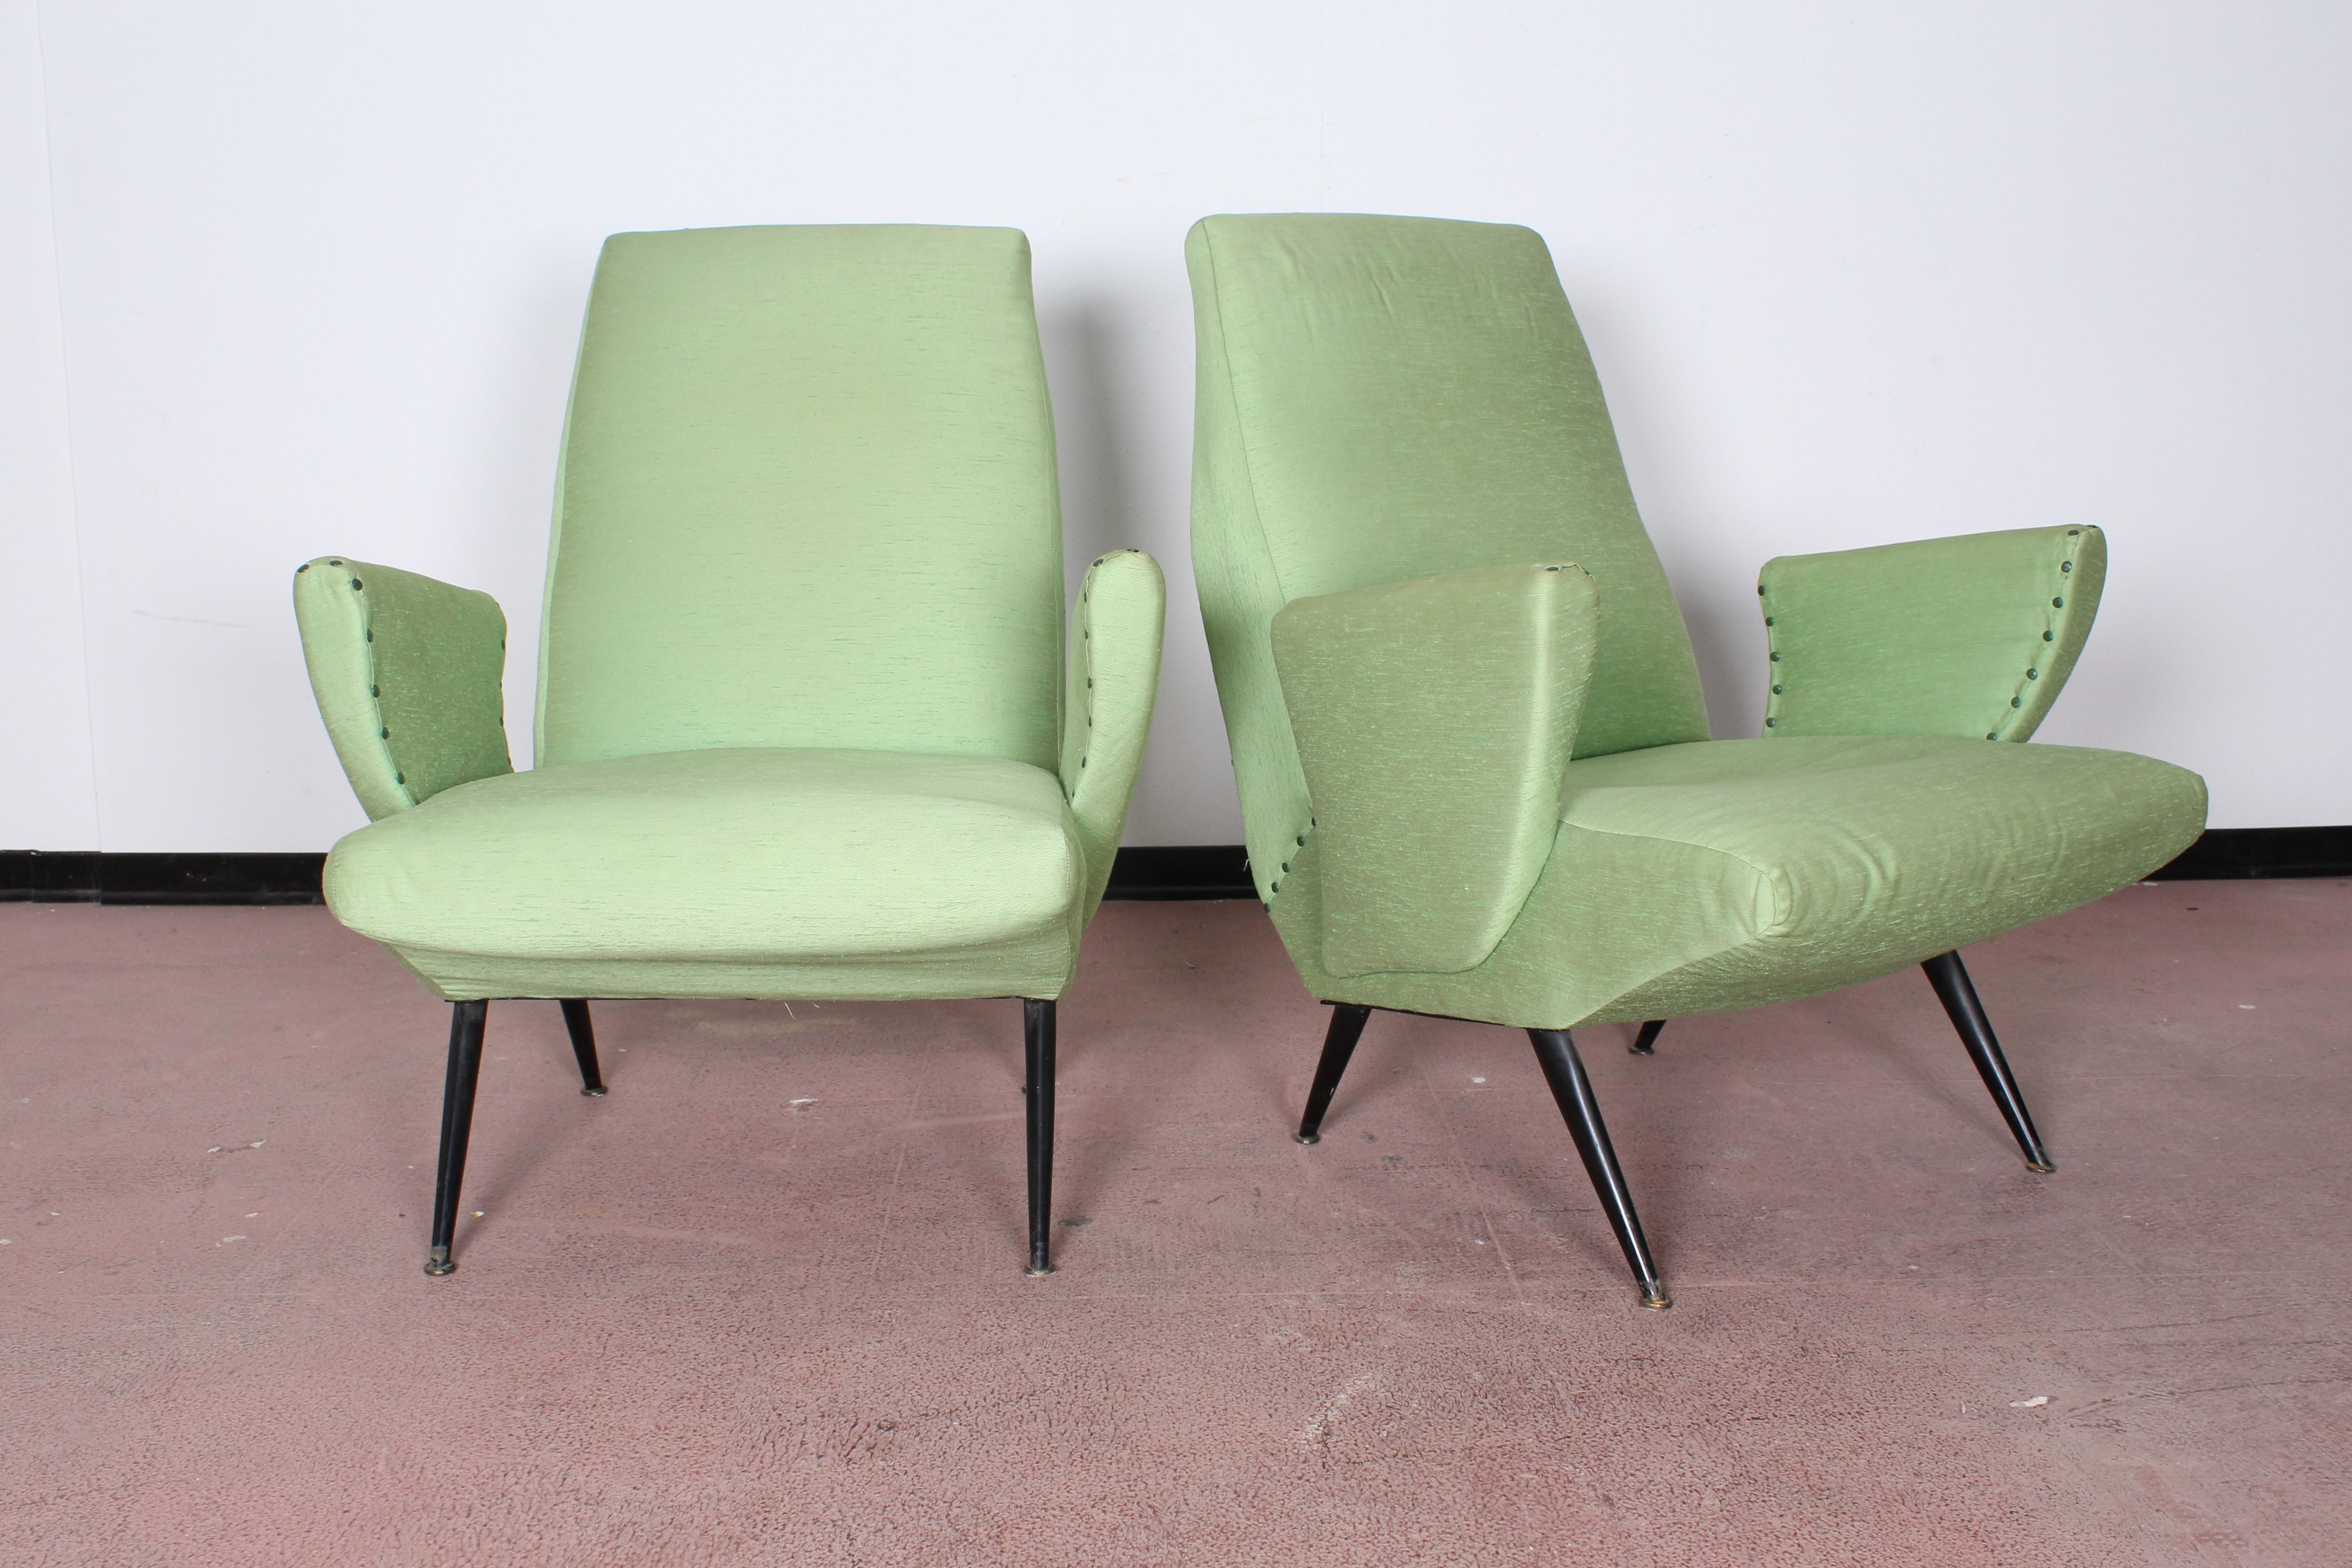 A  beautiful Pair of Nino Zoncada armchair ,original light green fabric and black metal legs. Manufactured in Italy, 1950s.
 Wear consistent with age and use.